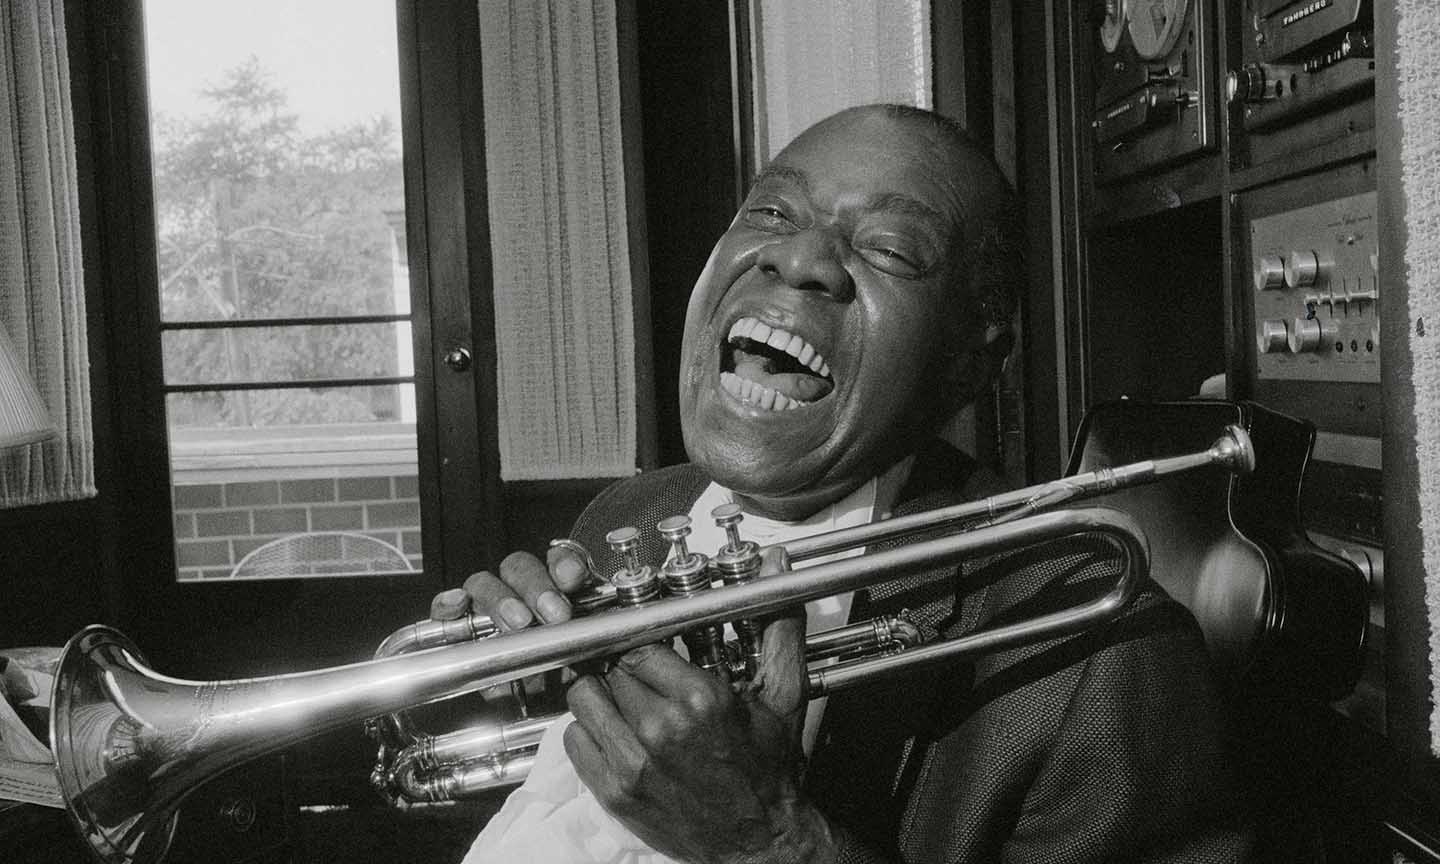 Louis Armstrong - 1926 - 1968 The Essential Works